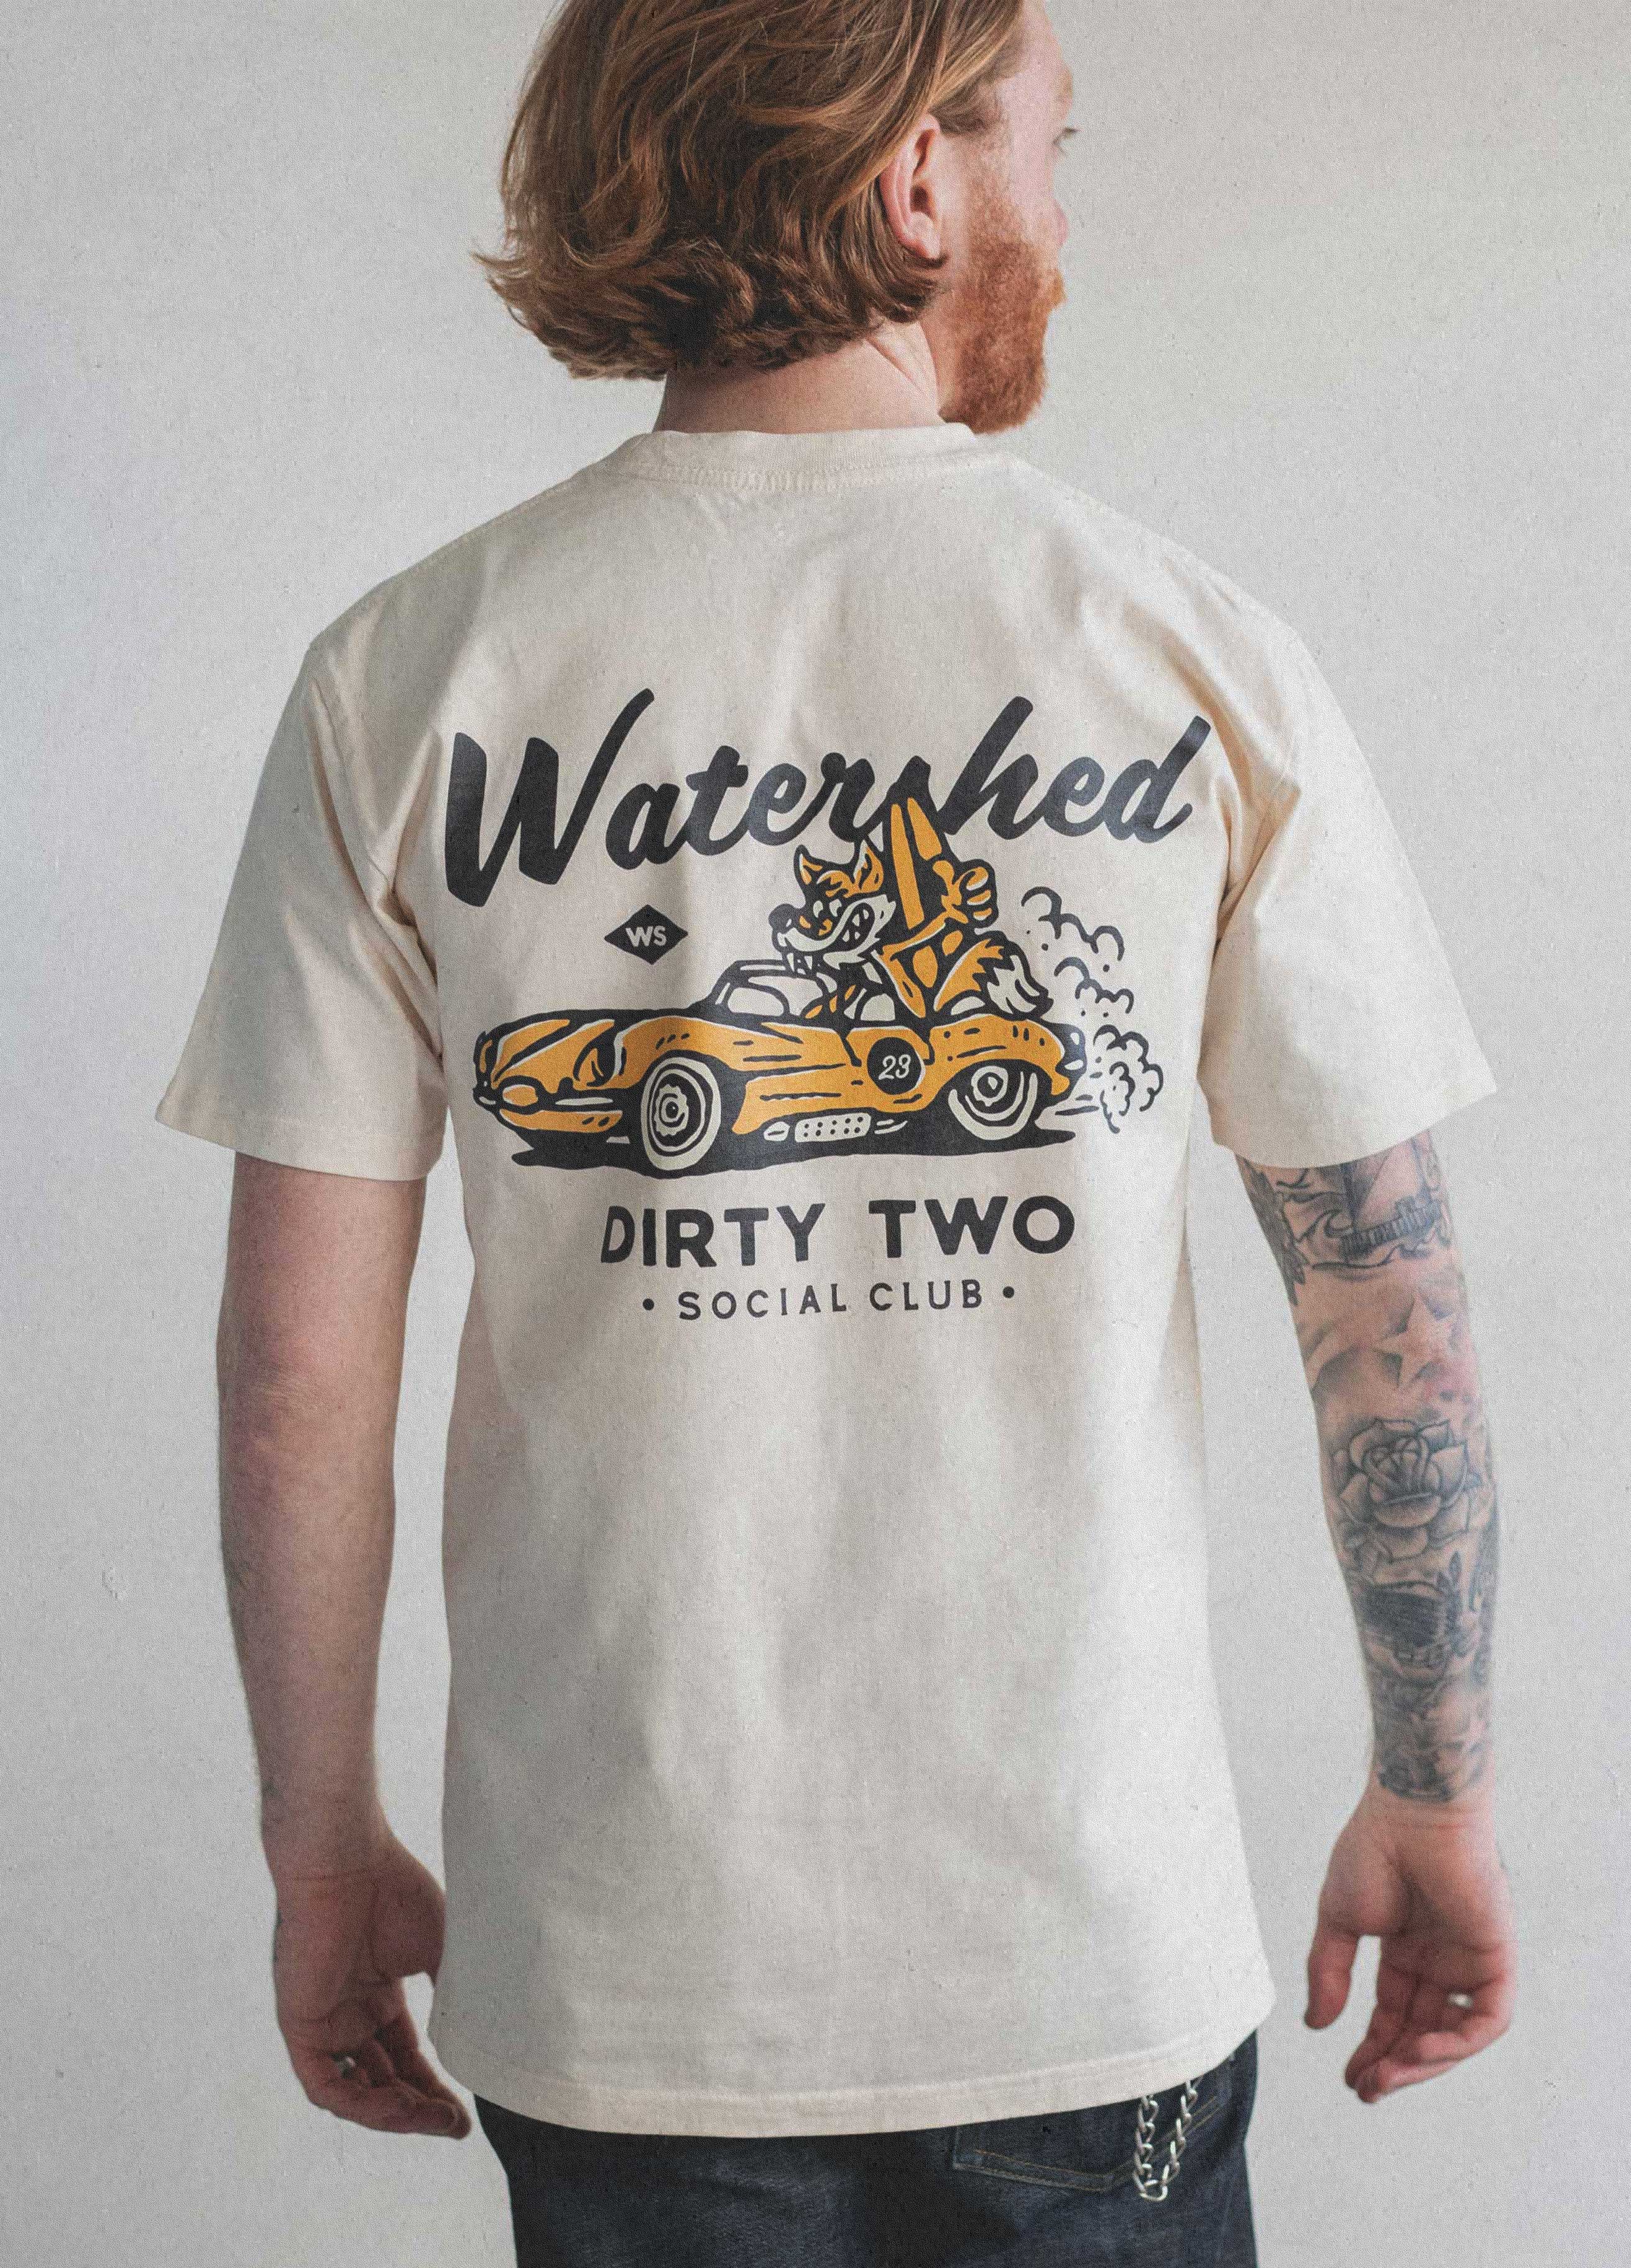 DIRTY_TWO_MOBILEE - Watershed Brand